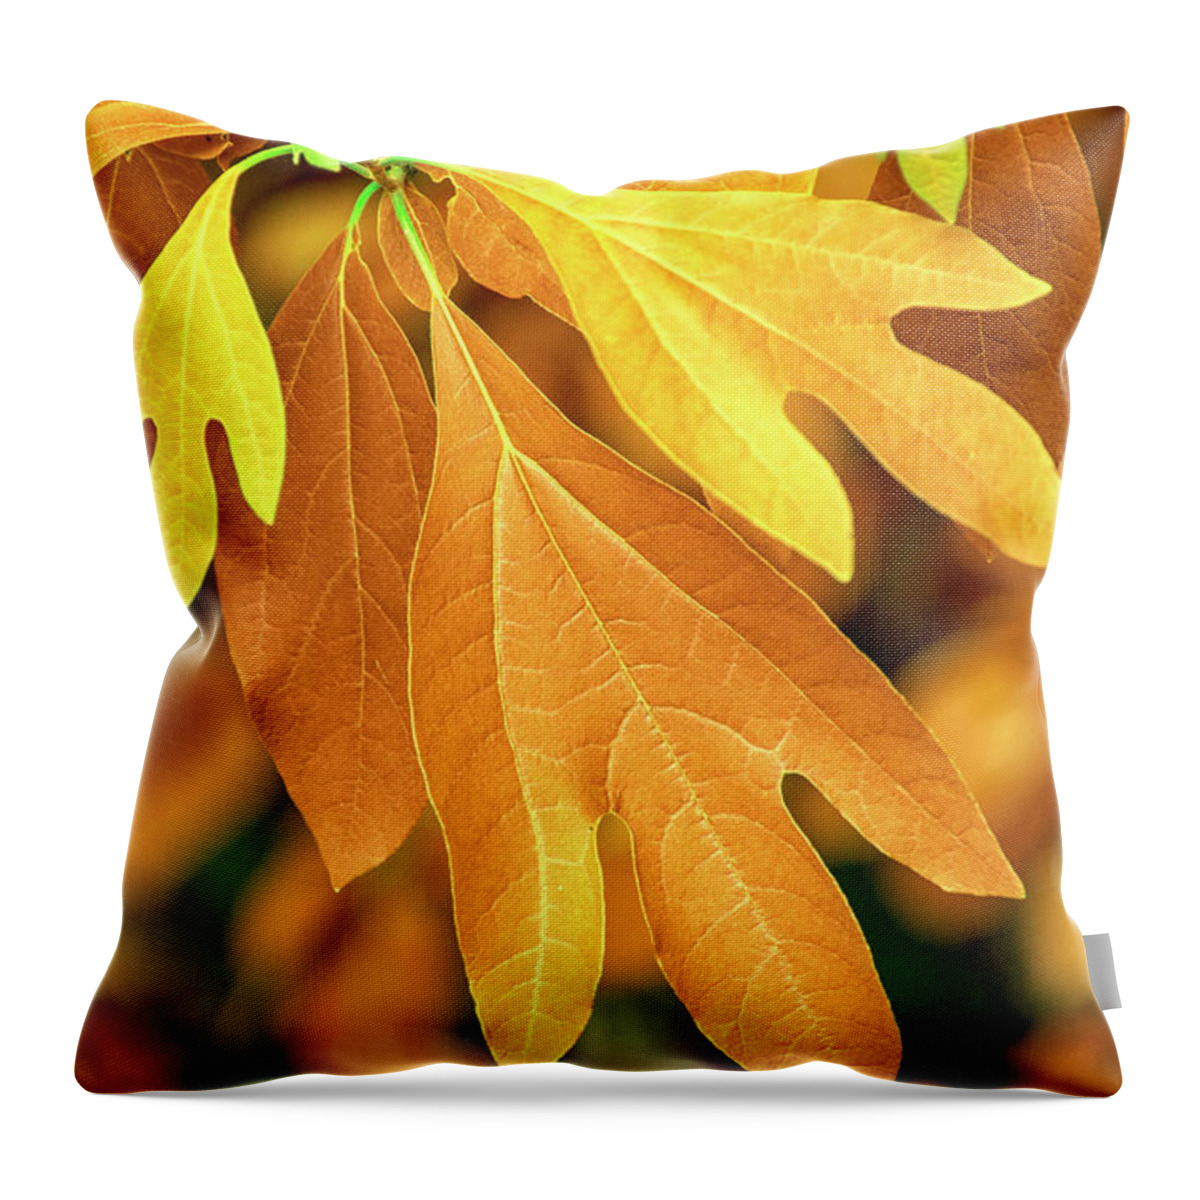 Autumn Leaves Throw Pillow featuring the photograph Autumn Leaves by Christina Rollo